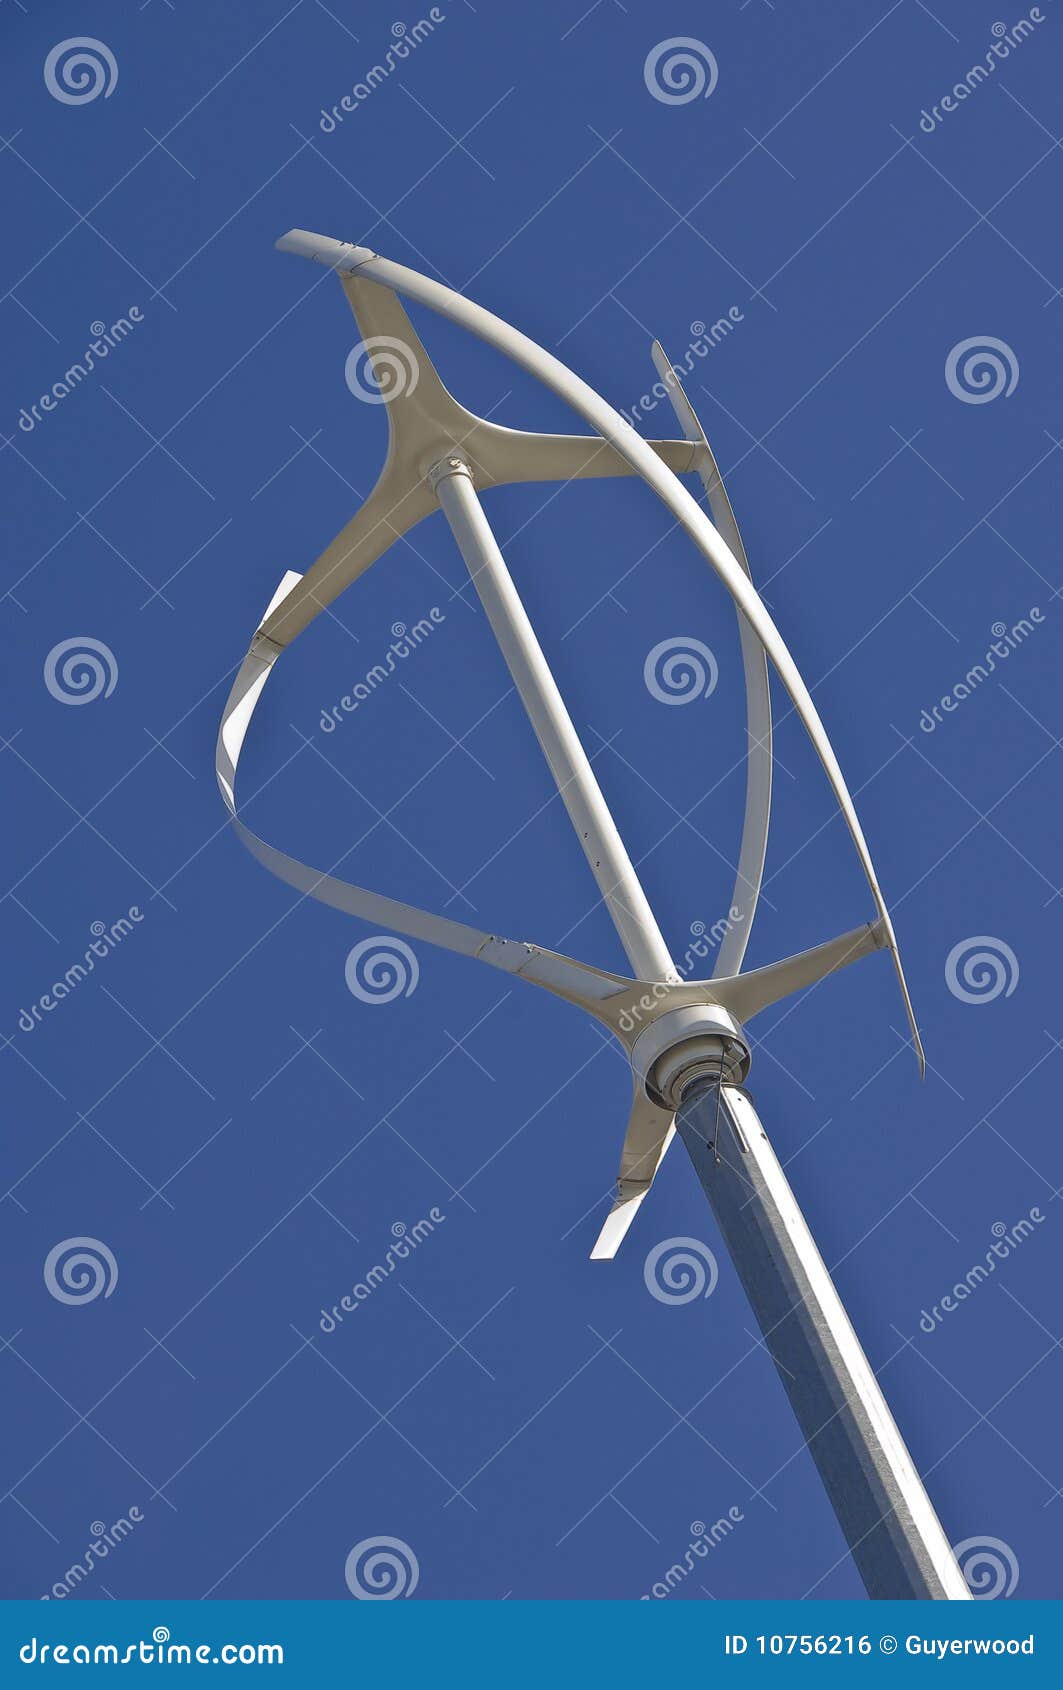  diagonal view of vertical axis wind turbine against a clear blue sky